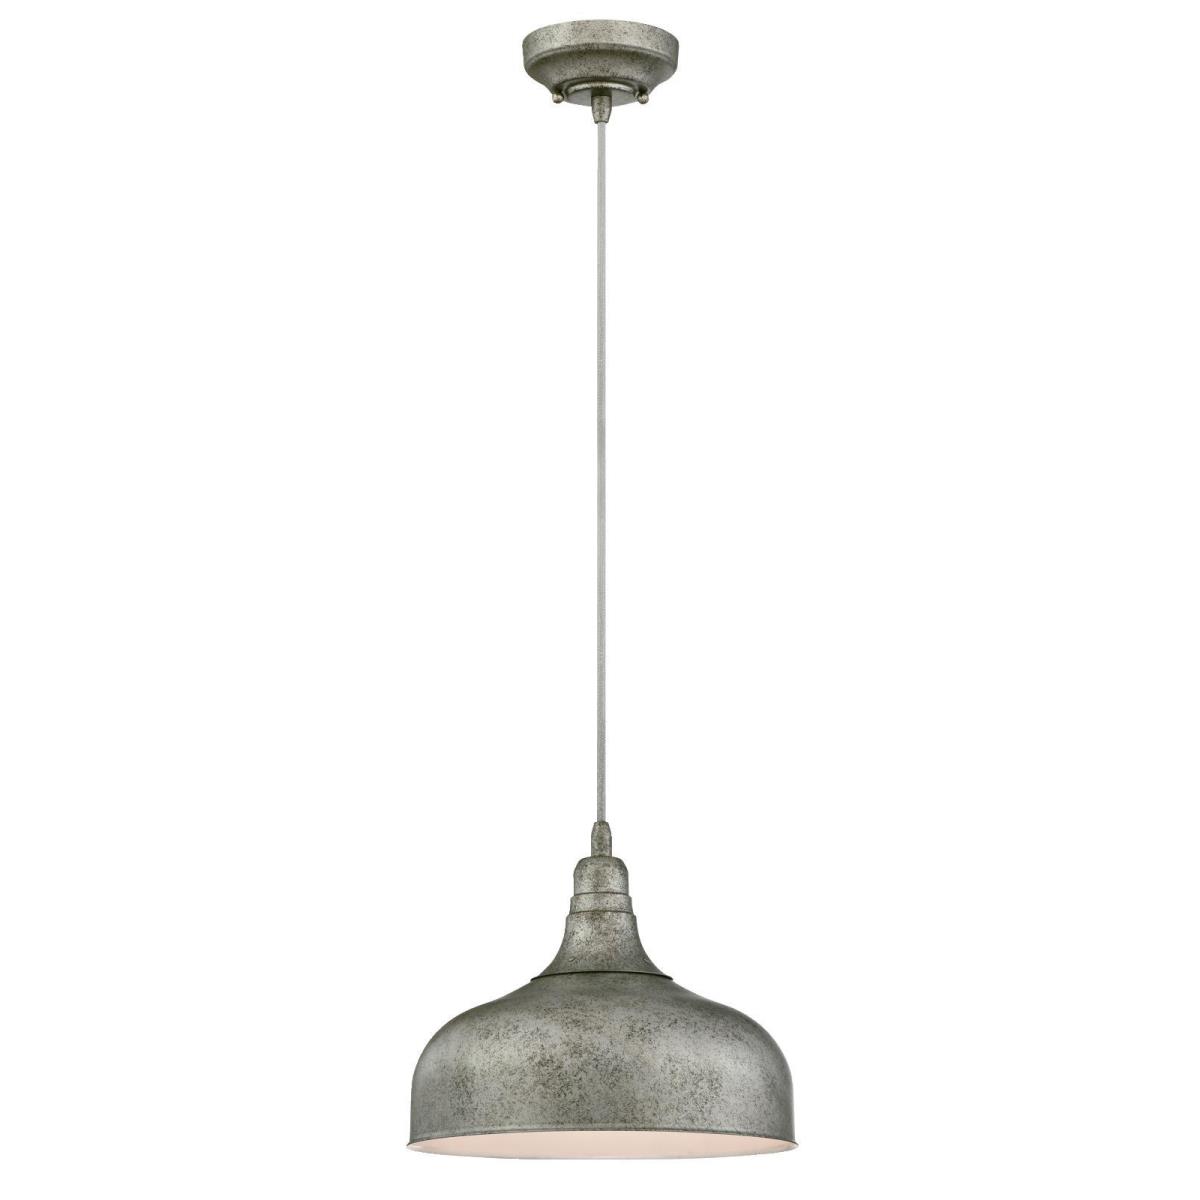 1 Light Pendant Antique Steel Finish with Metal Shade